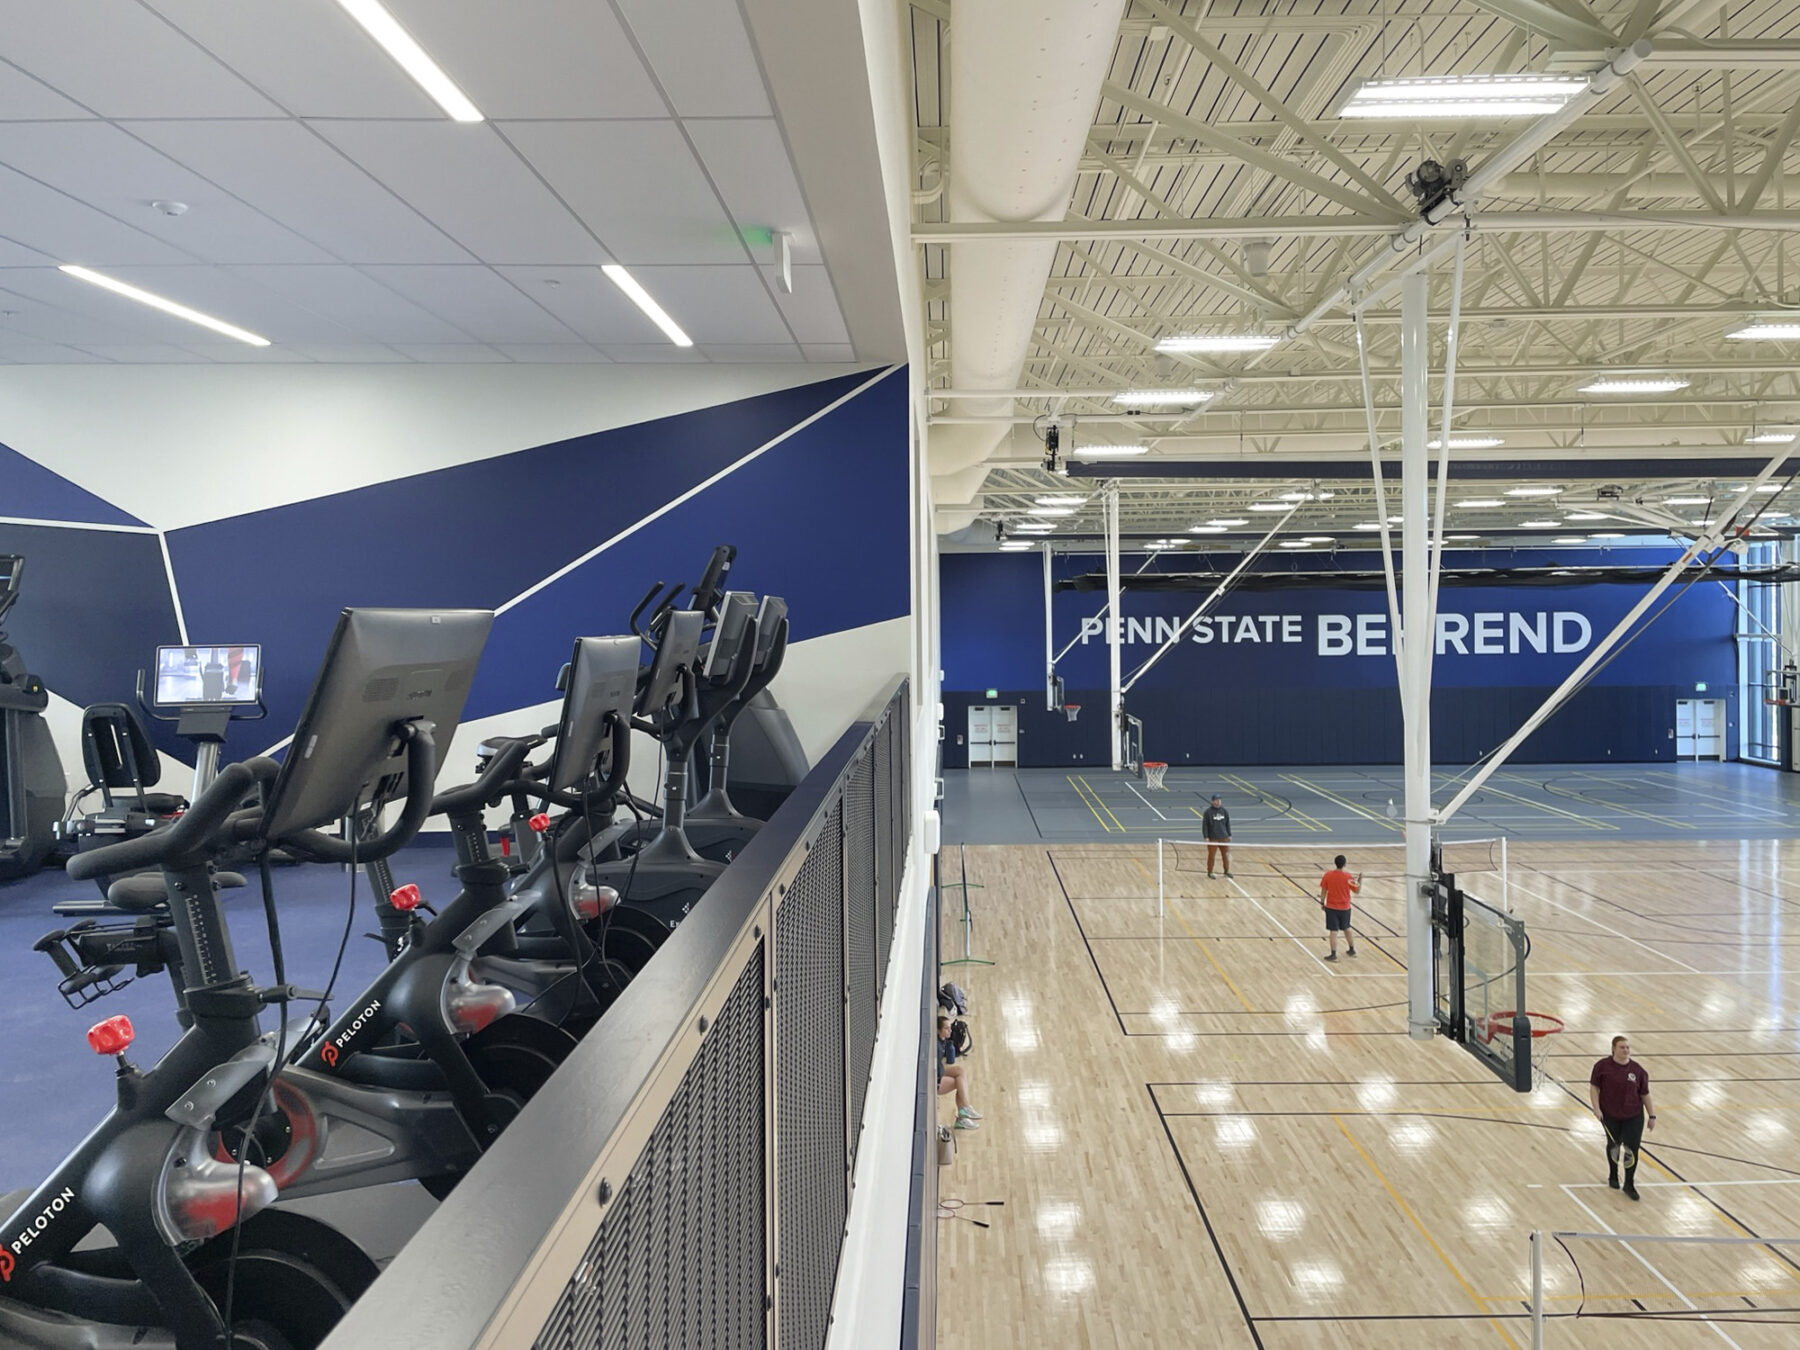 View of the bike machines on the second floor overlooking the basketball court below